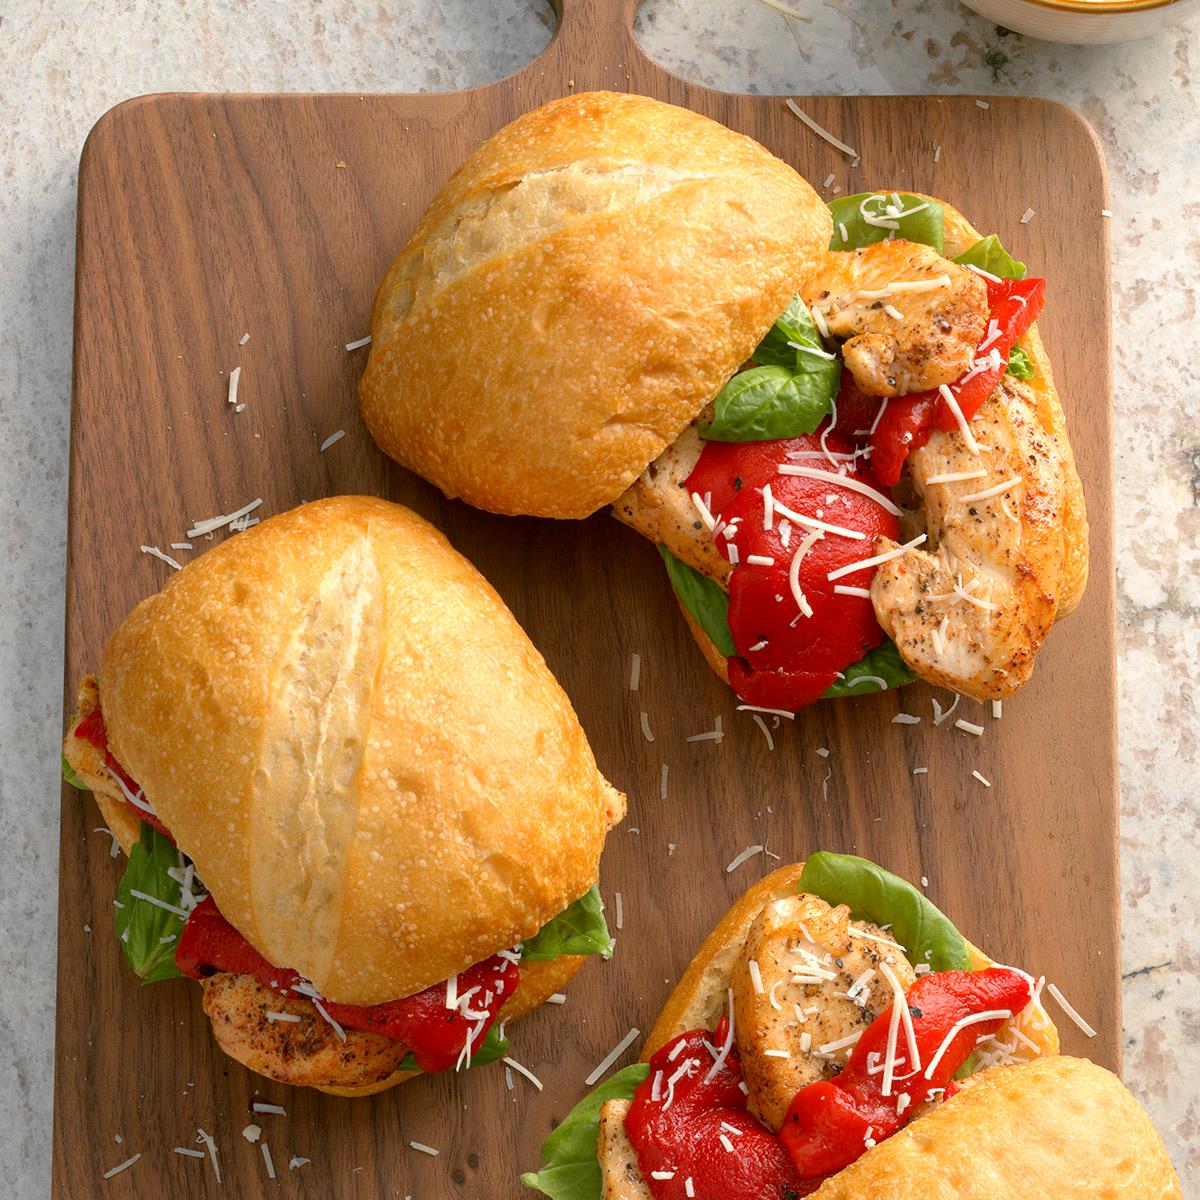 I got the inspiration for this recipe when I knew my parents and in-laws were coming to see our new home. My mother-in-law has food allergies, my father-in-law has some very specific food preferences and my parents appreciate light meals. I created this chicken sandwich with fresh basil for our lunch. —Kerry Durgin Krebs, New Market, Maryland <a href="https://www.tasteofhome.com/recipes/basil-chicken-sandwiches/">Get Recipe</a>